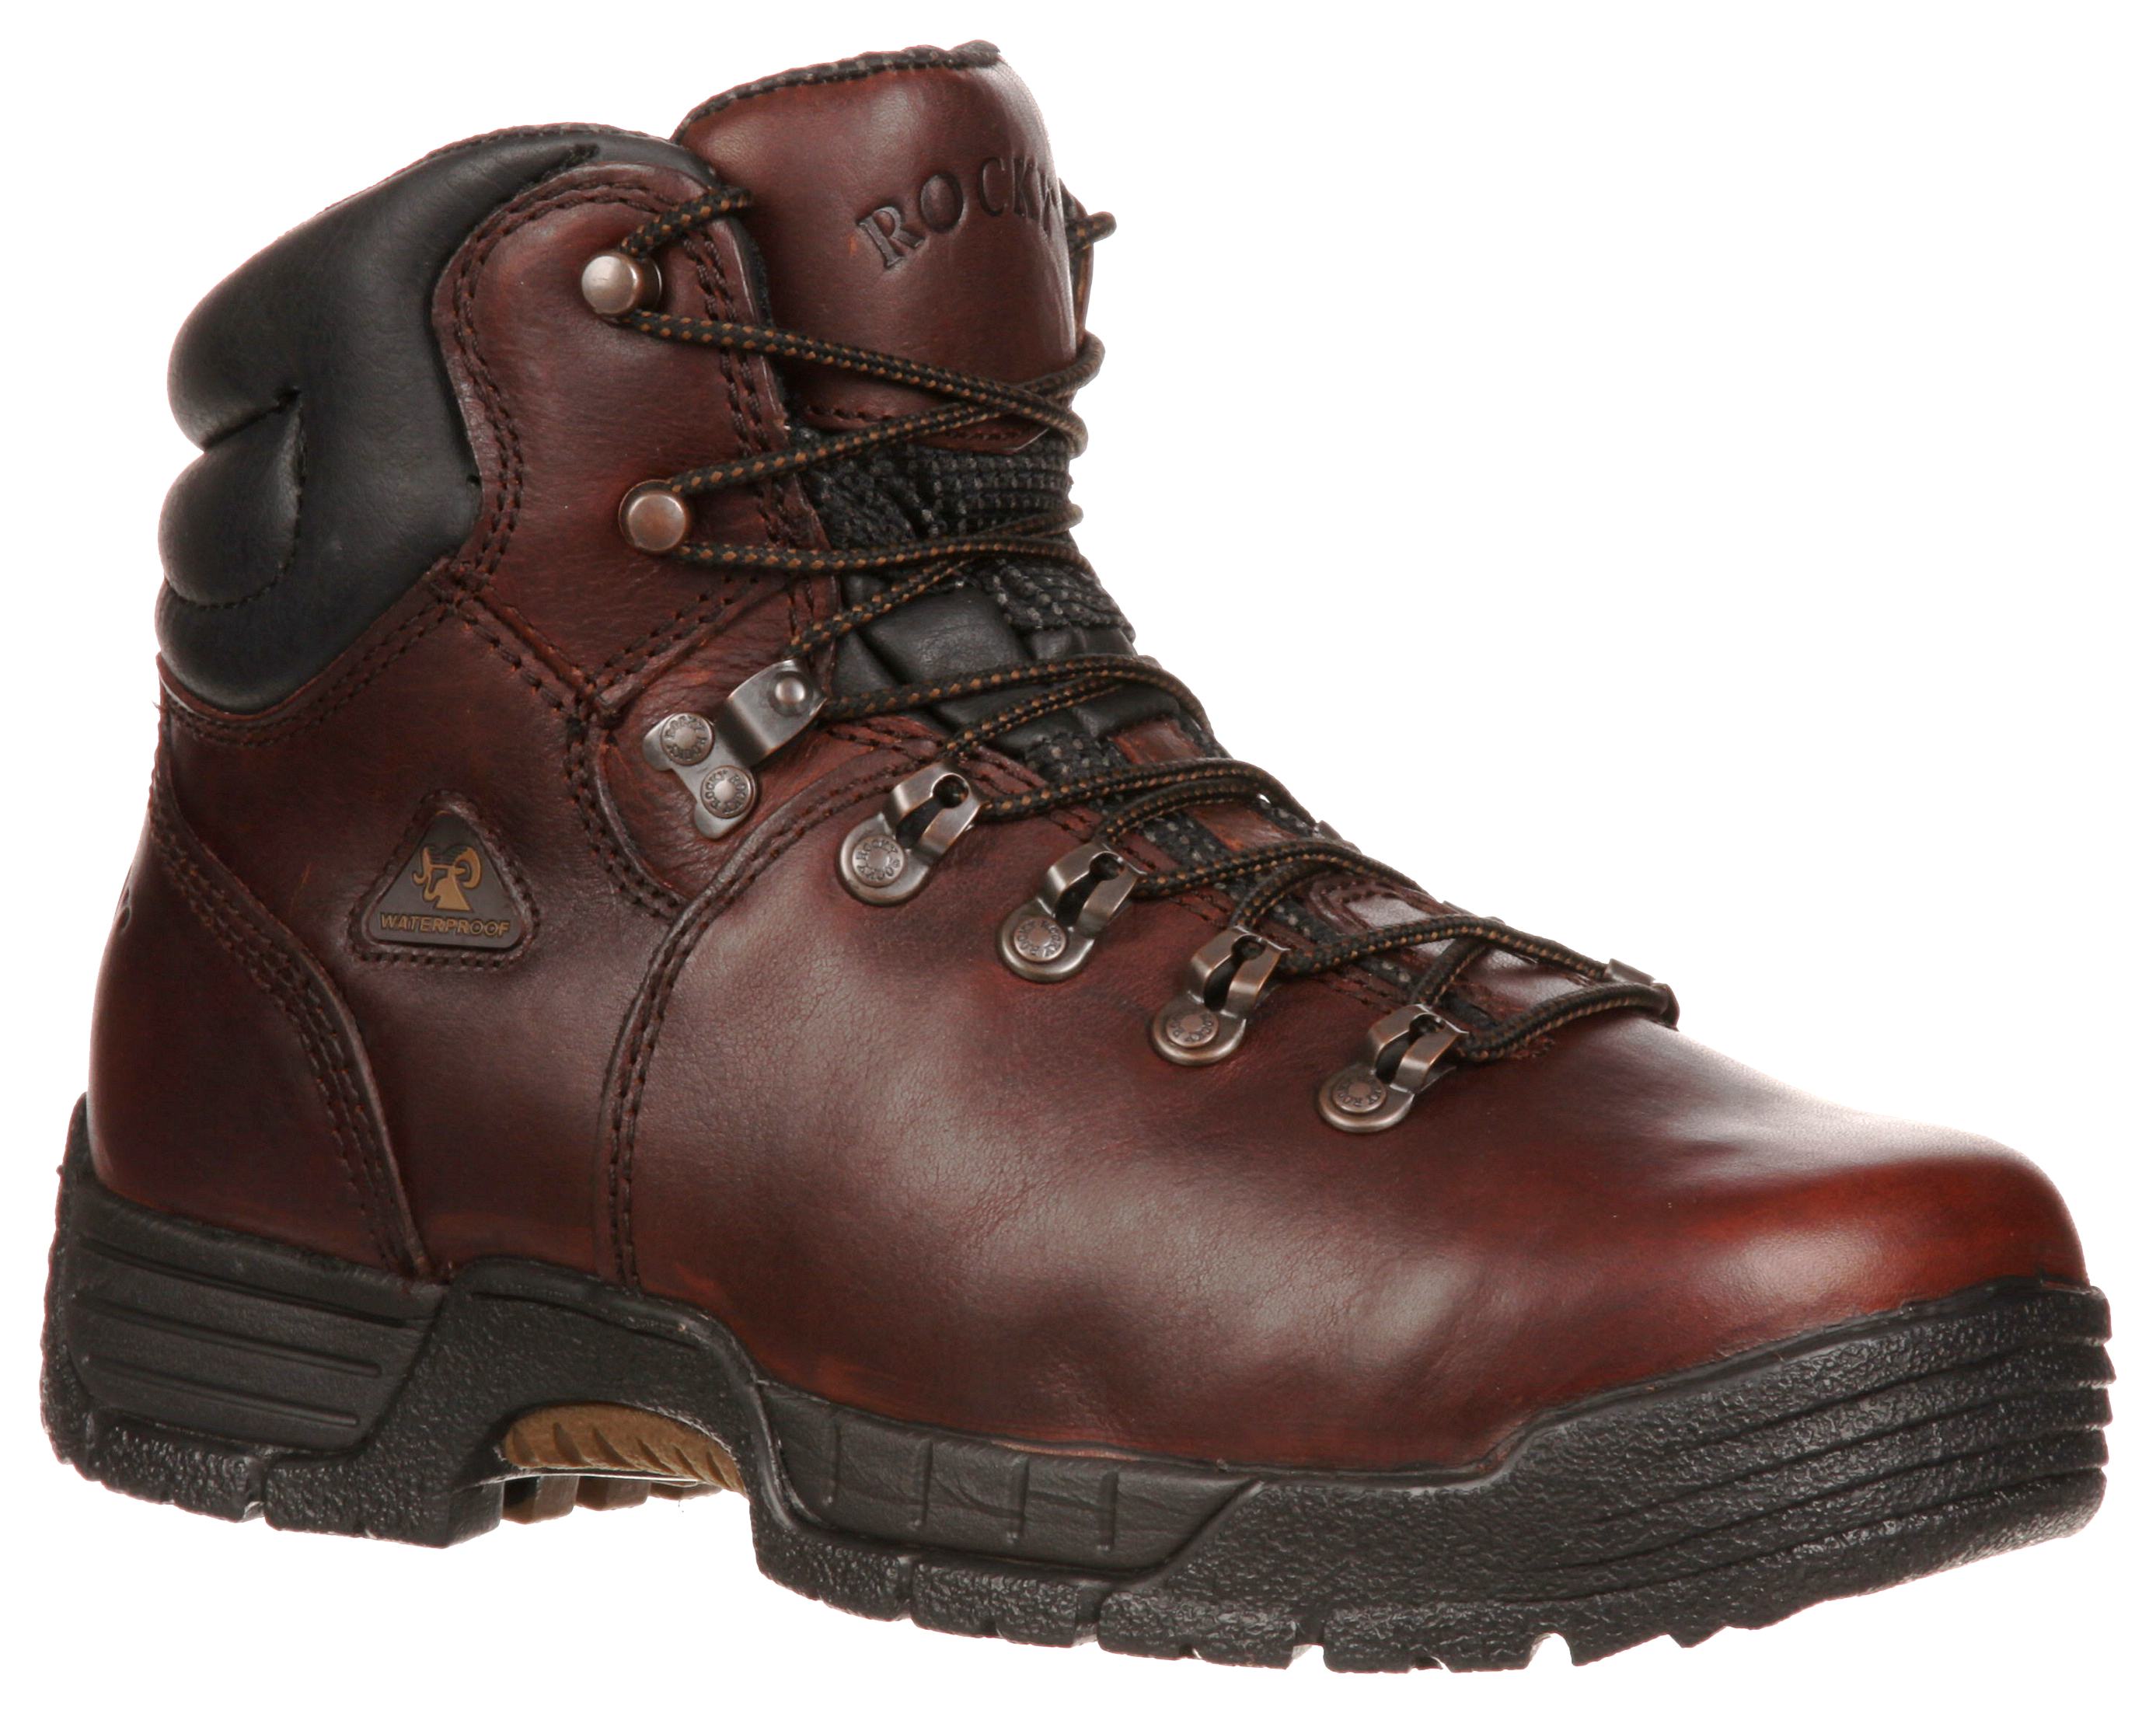 ROCKY MobiLite Waterproof Work Boots for Men - Brown - 12 W